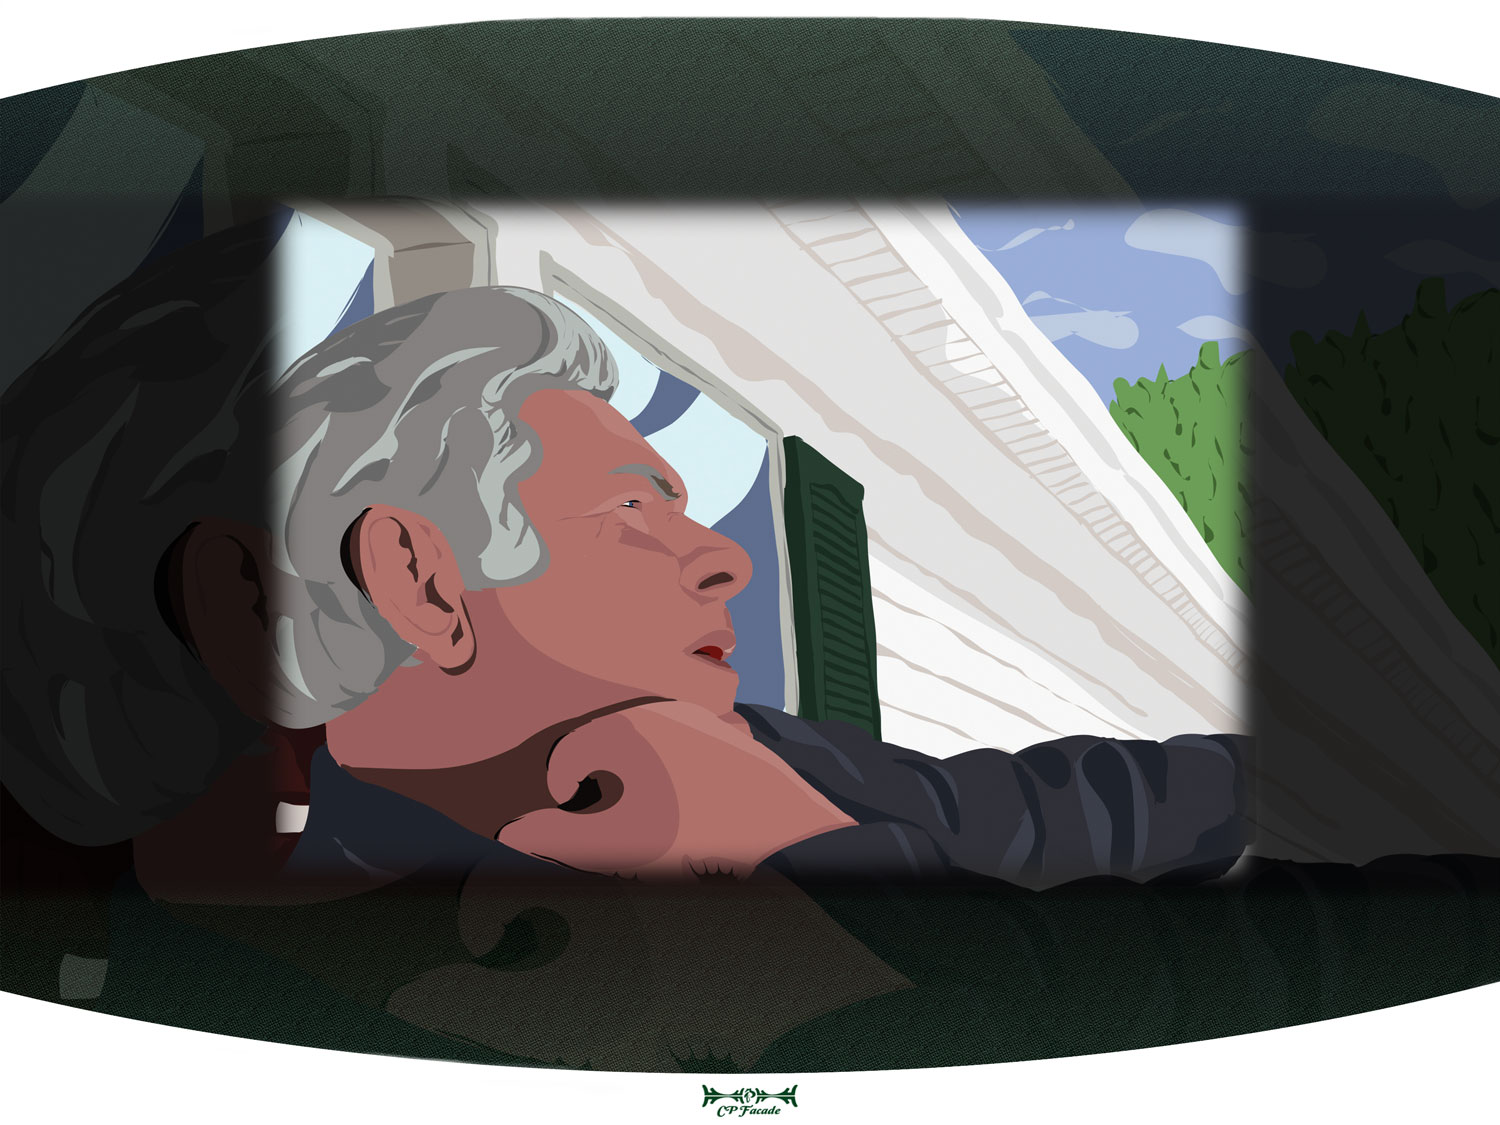 Custom Illustration of old man thinking about his past life